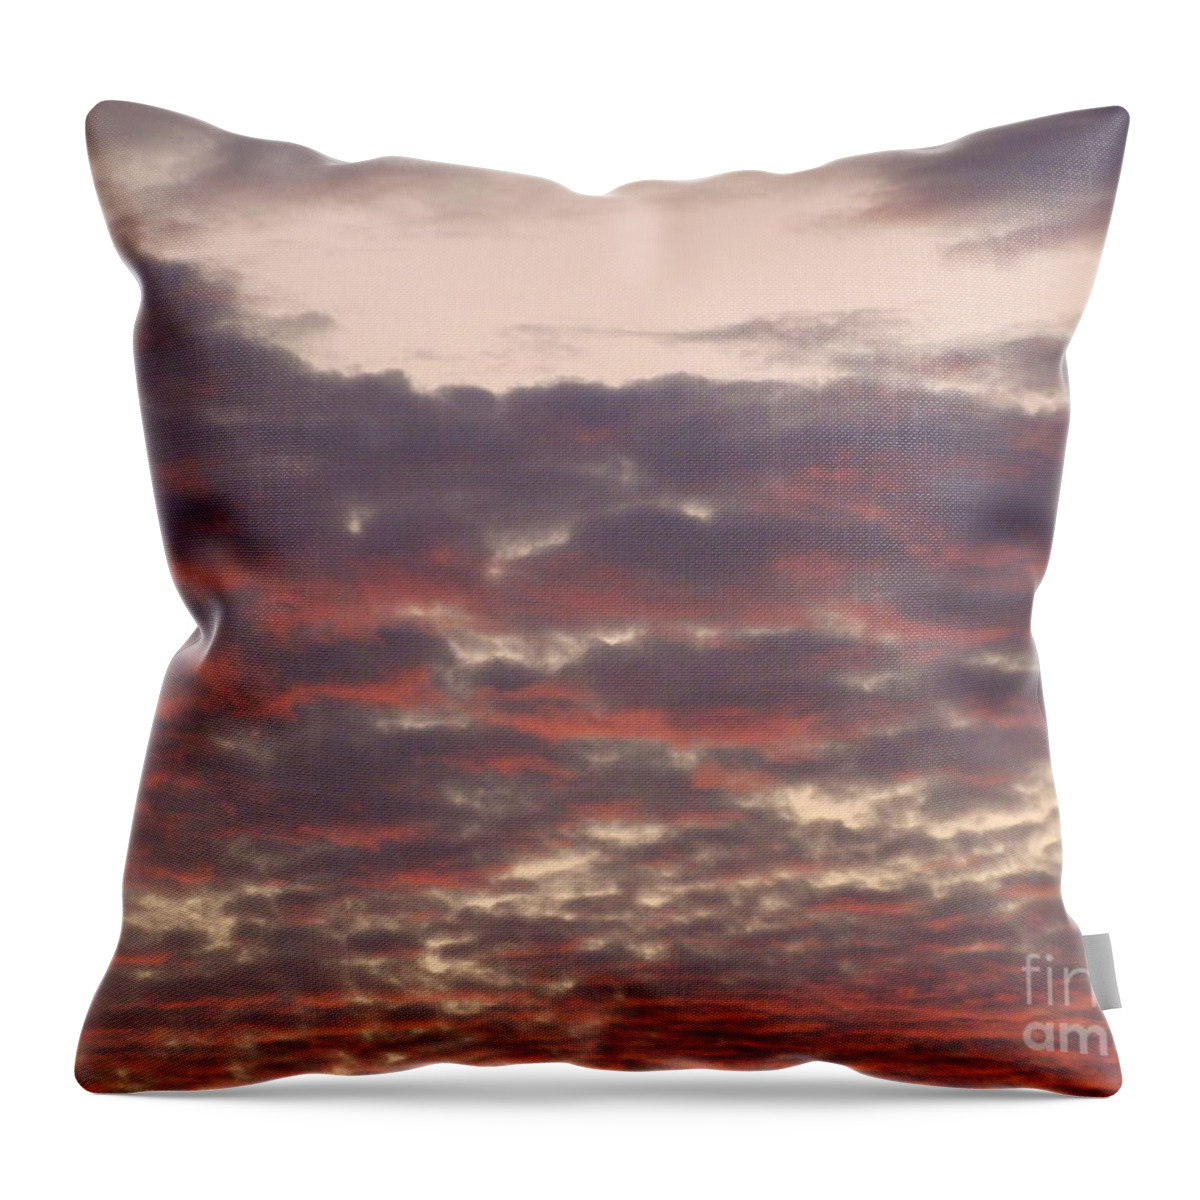 Summer Throw Pillow featuring the photograph Late Summer Evening Sky by Tiziana Maniezzo